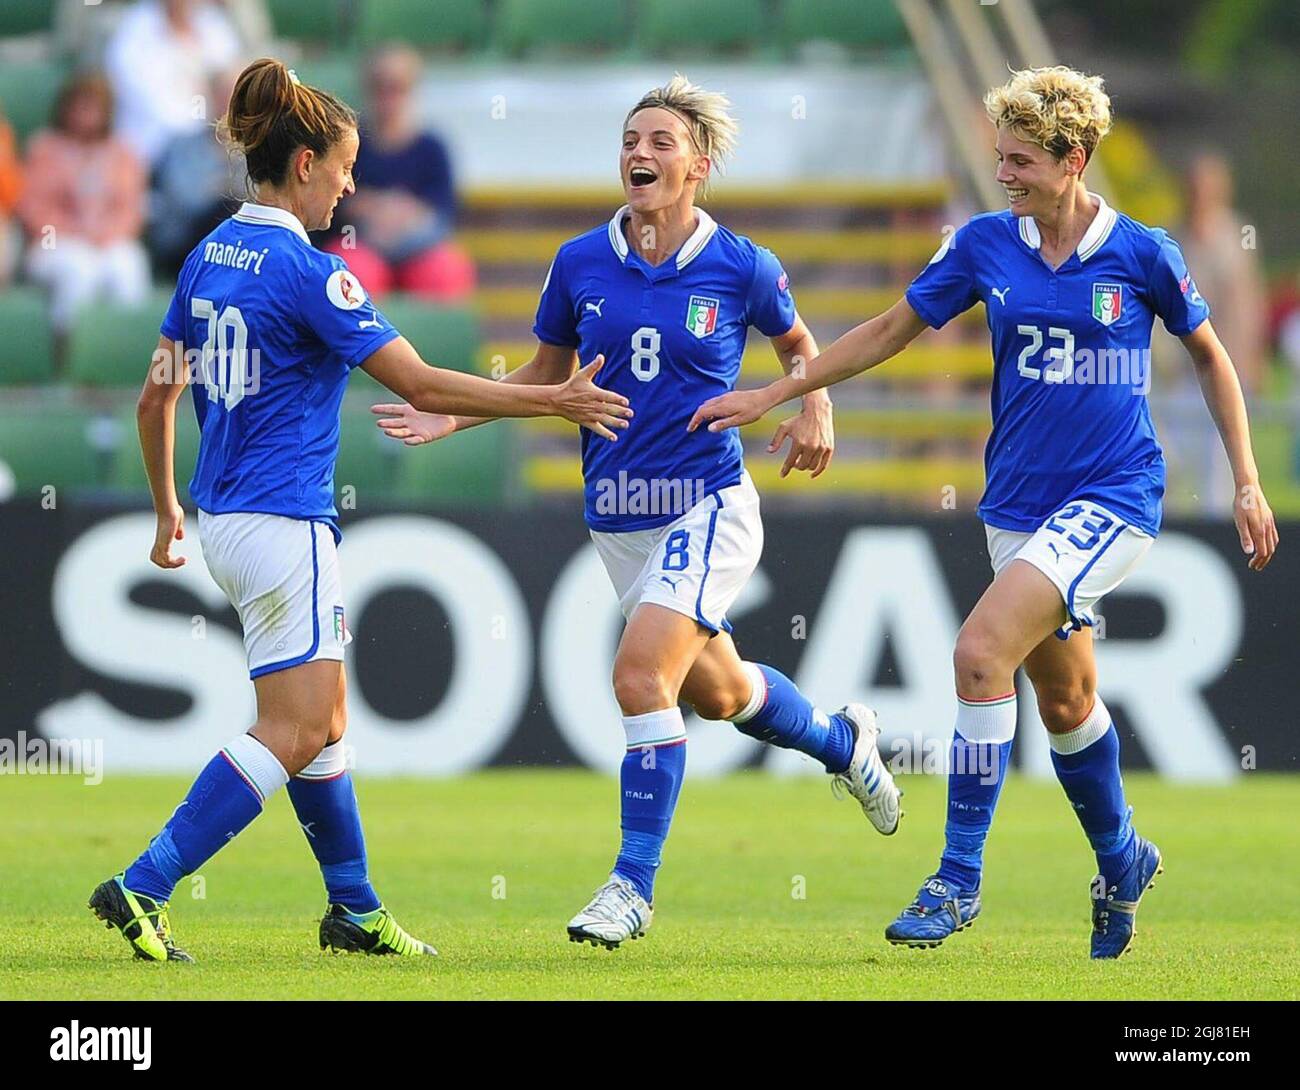 HALMSTAD 2013-07-13 Italy's Melania Gabbiadini, center, celebrates with team mates Raffaella Manieri (, left, and Cecilia Salvai after scoring the team's first goal during the UEFA Women's EURO 2013 group A soccer match between Denmark and Italy at Orjans vall in Halmstad, Sweden, on July 13, 2013. Photo: Bjorn Lindgren / SCANPIX / code 9204  Stock Photo